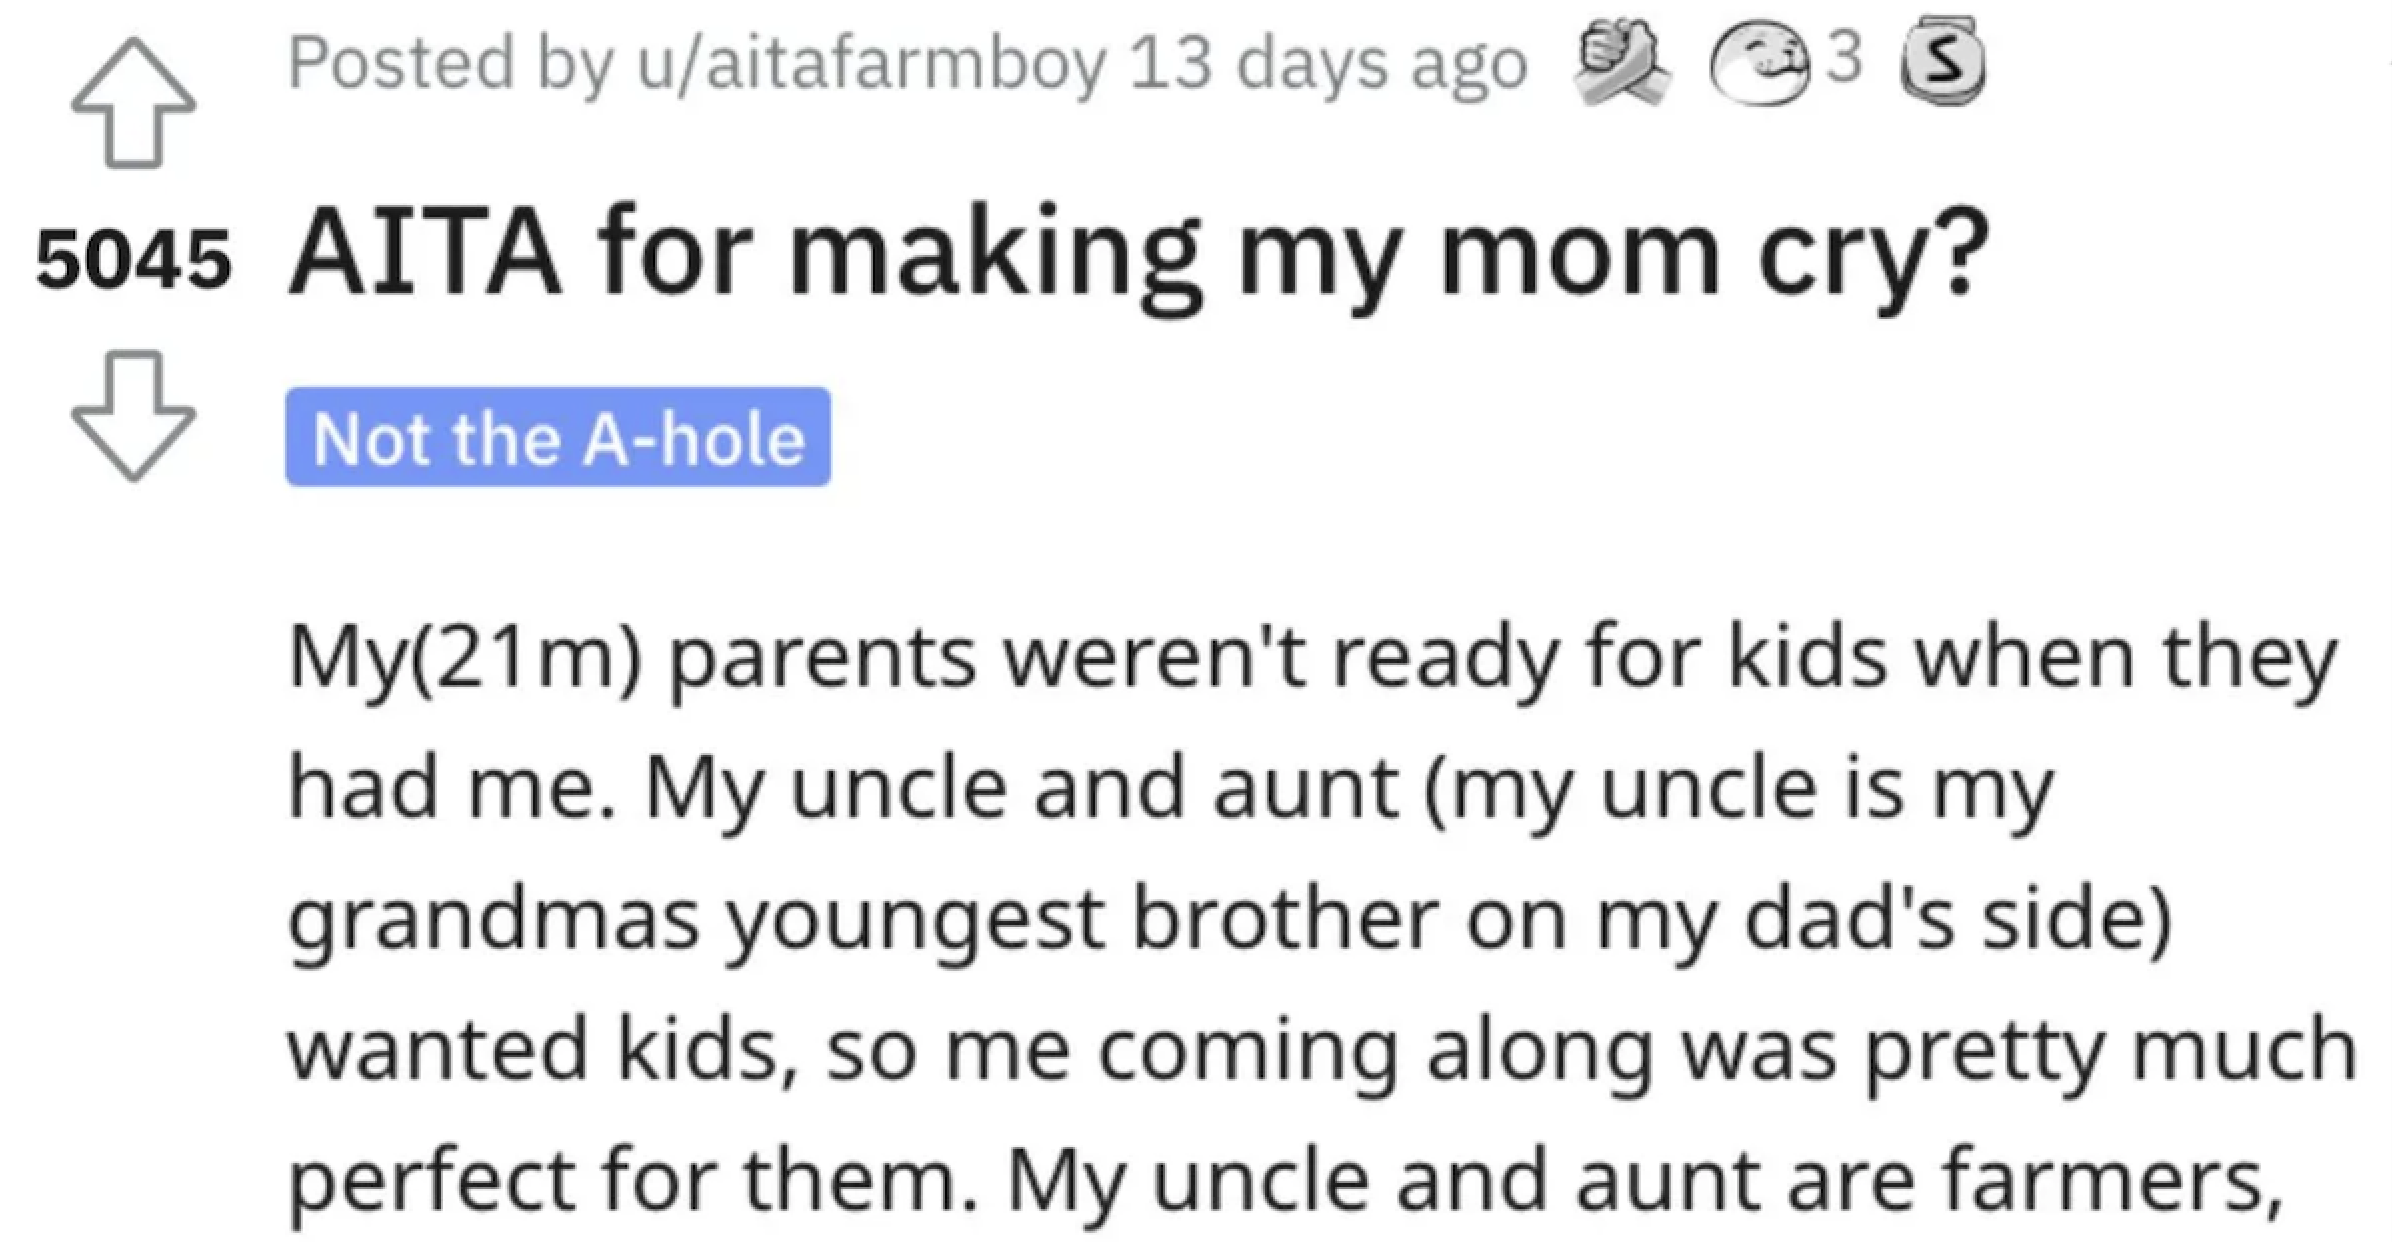 AITA Making Mom Cry Bio He Made His Biological Mom Cry After She Tried To Pull The Mom Card. Was He A Jerk?